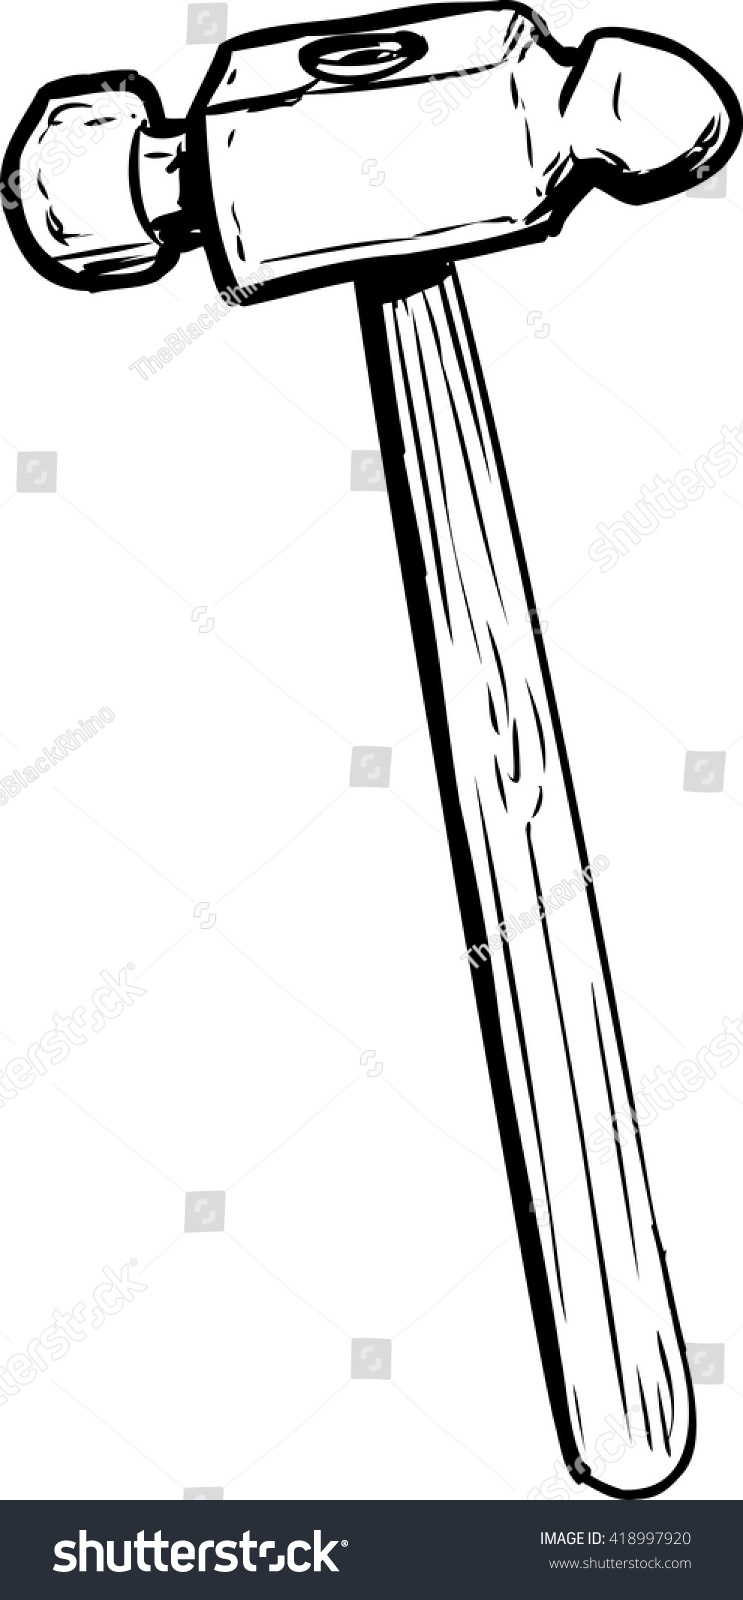 SVG of Single ball pein hammer outline with wooden handle over isolated white background svg